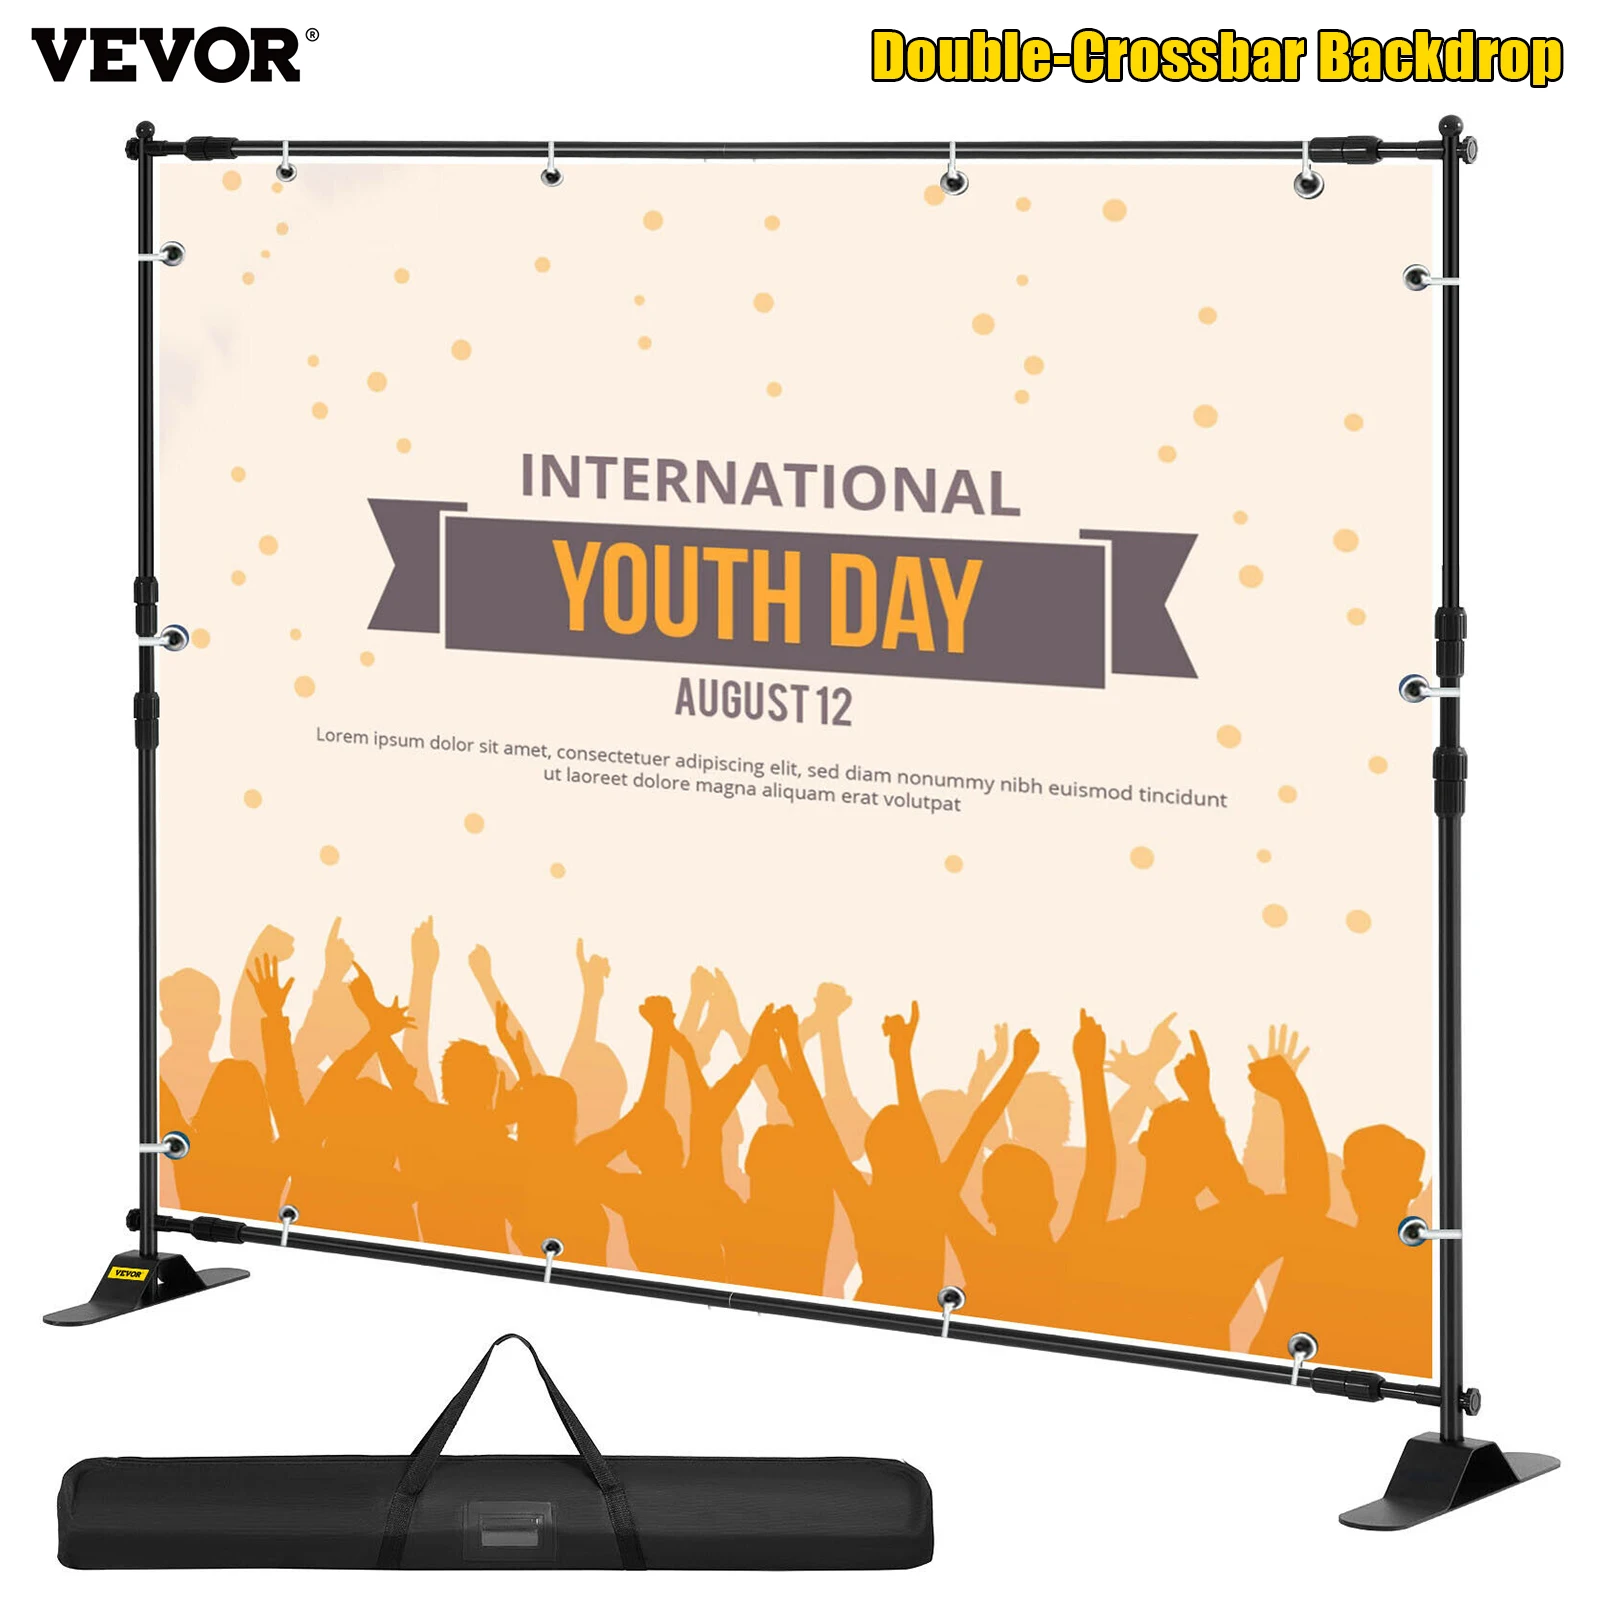 

VEVOR 8ft Backdrop Banner Stand Step and Repeat for Trade Show Wall Exhibitor W/ Carrying Case Photo Booth Background Adjustable